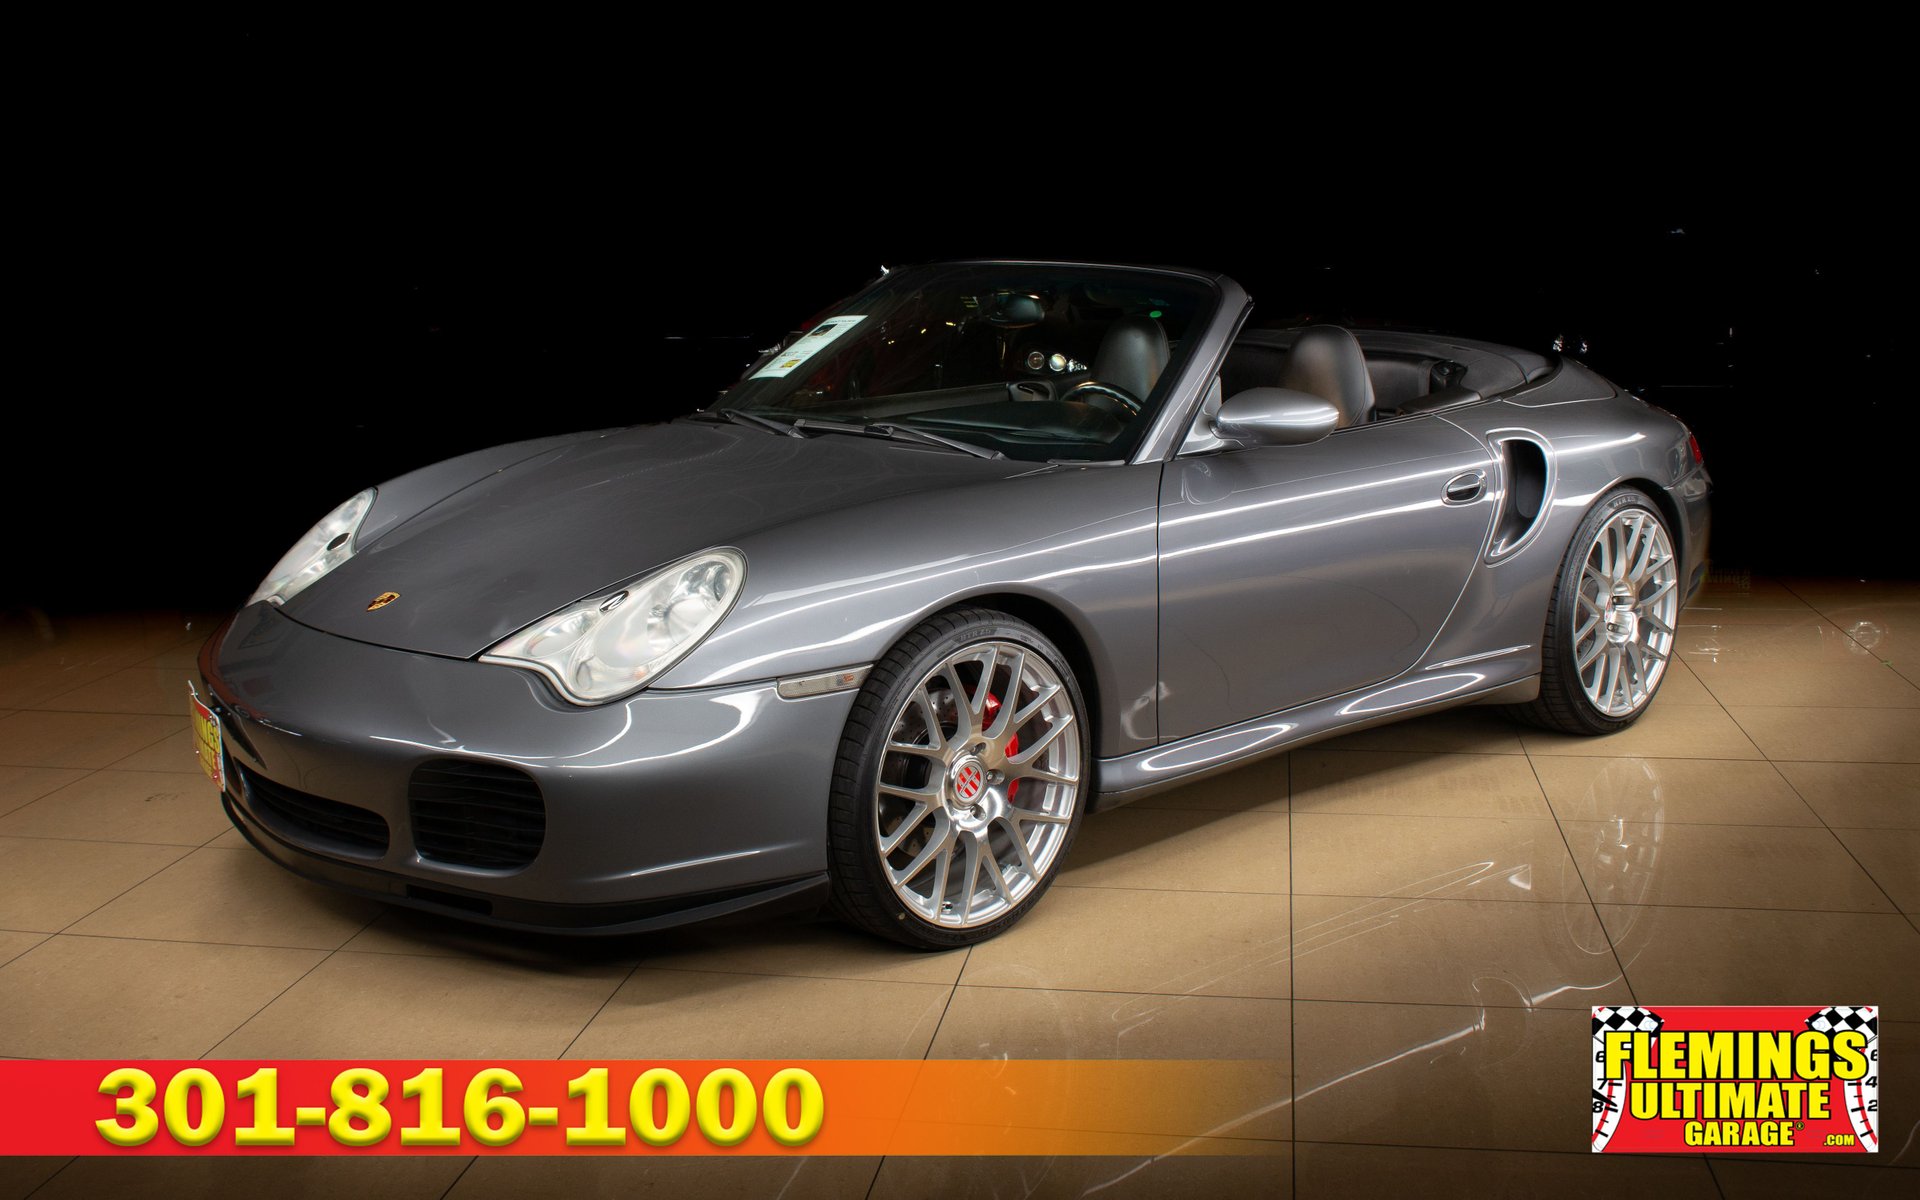 porsche 911 cabriolet 996 turbo used – Search for your used car on the  parking